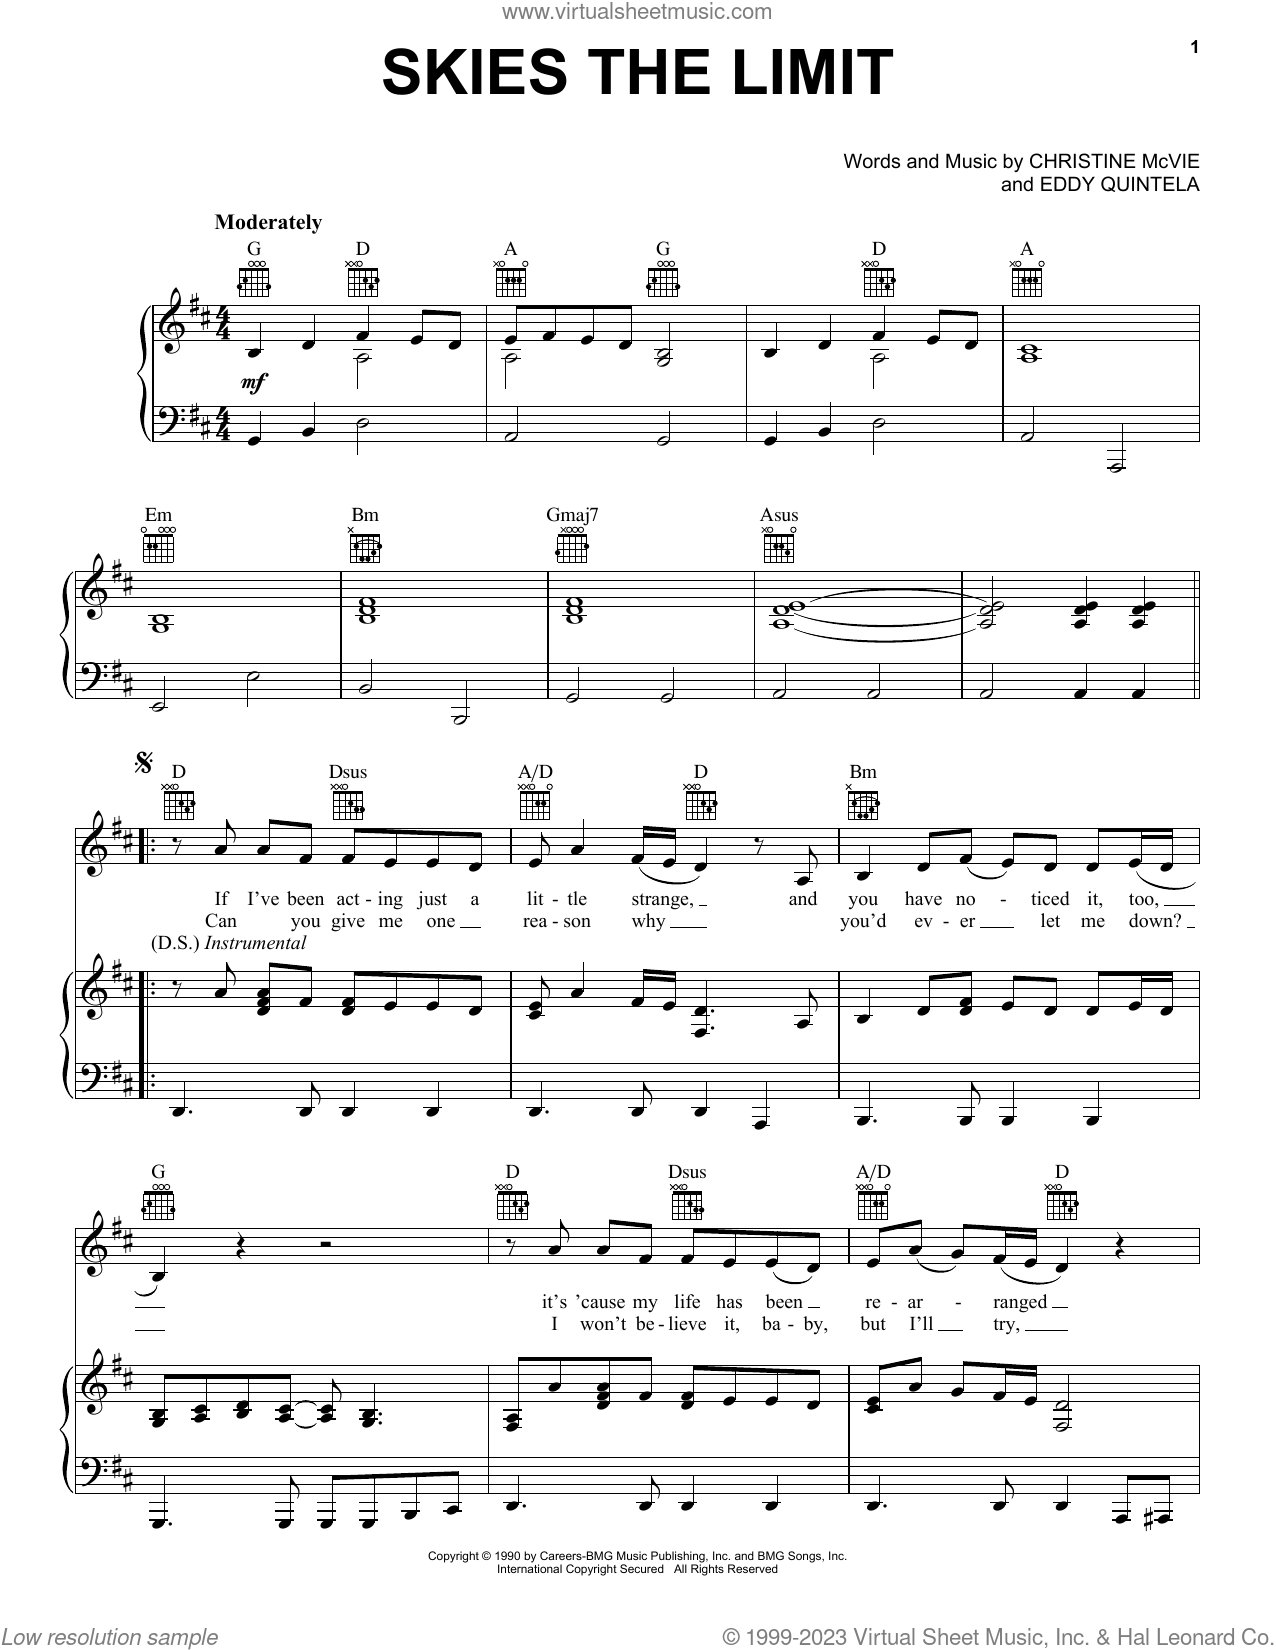 Skies The Limit sheet music for voice, piano or guitar (PDF)